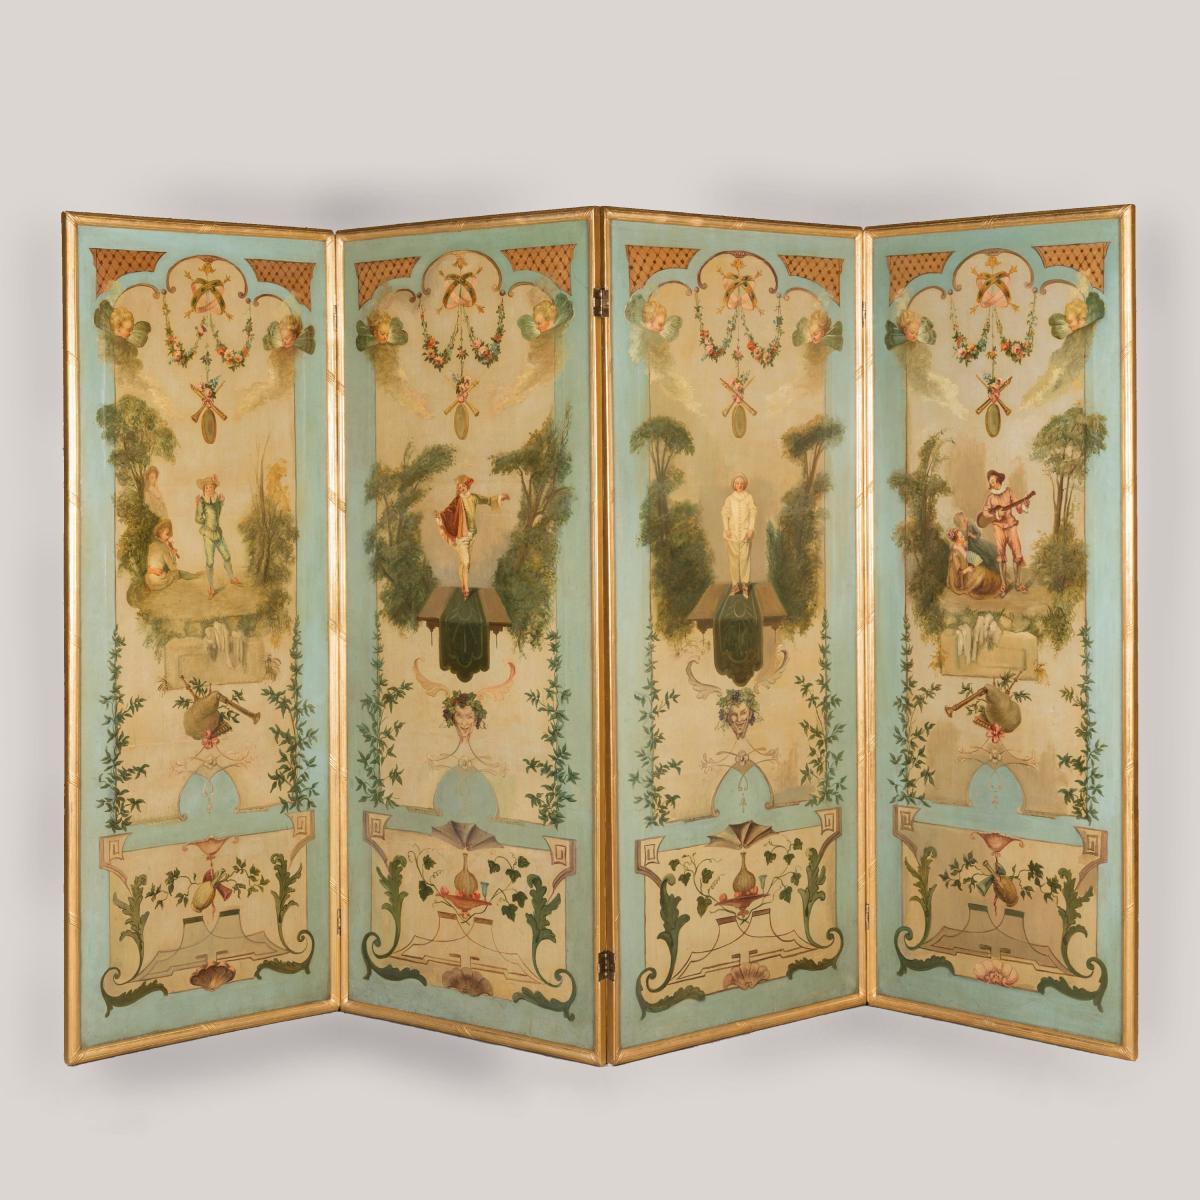 Painted Four-Fold Screen In the Rococo Manner